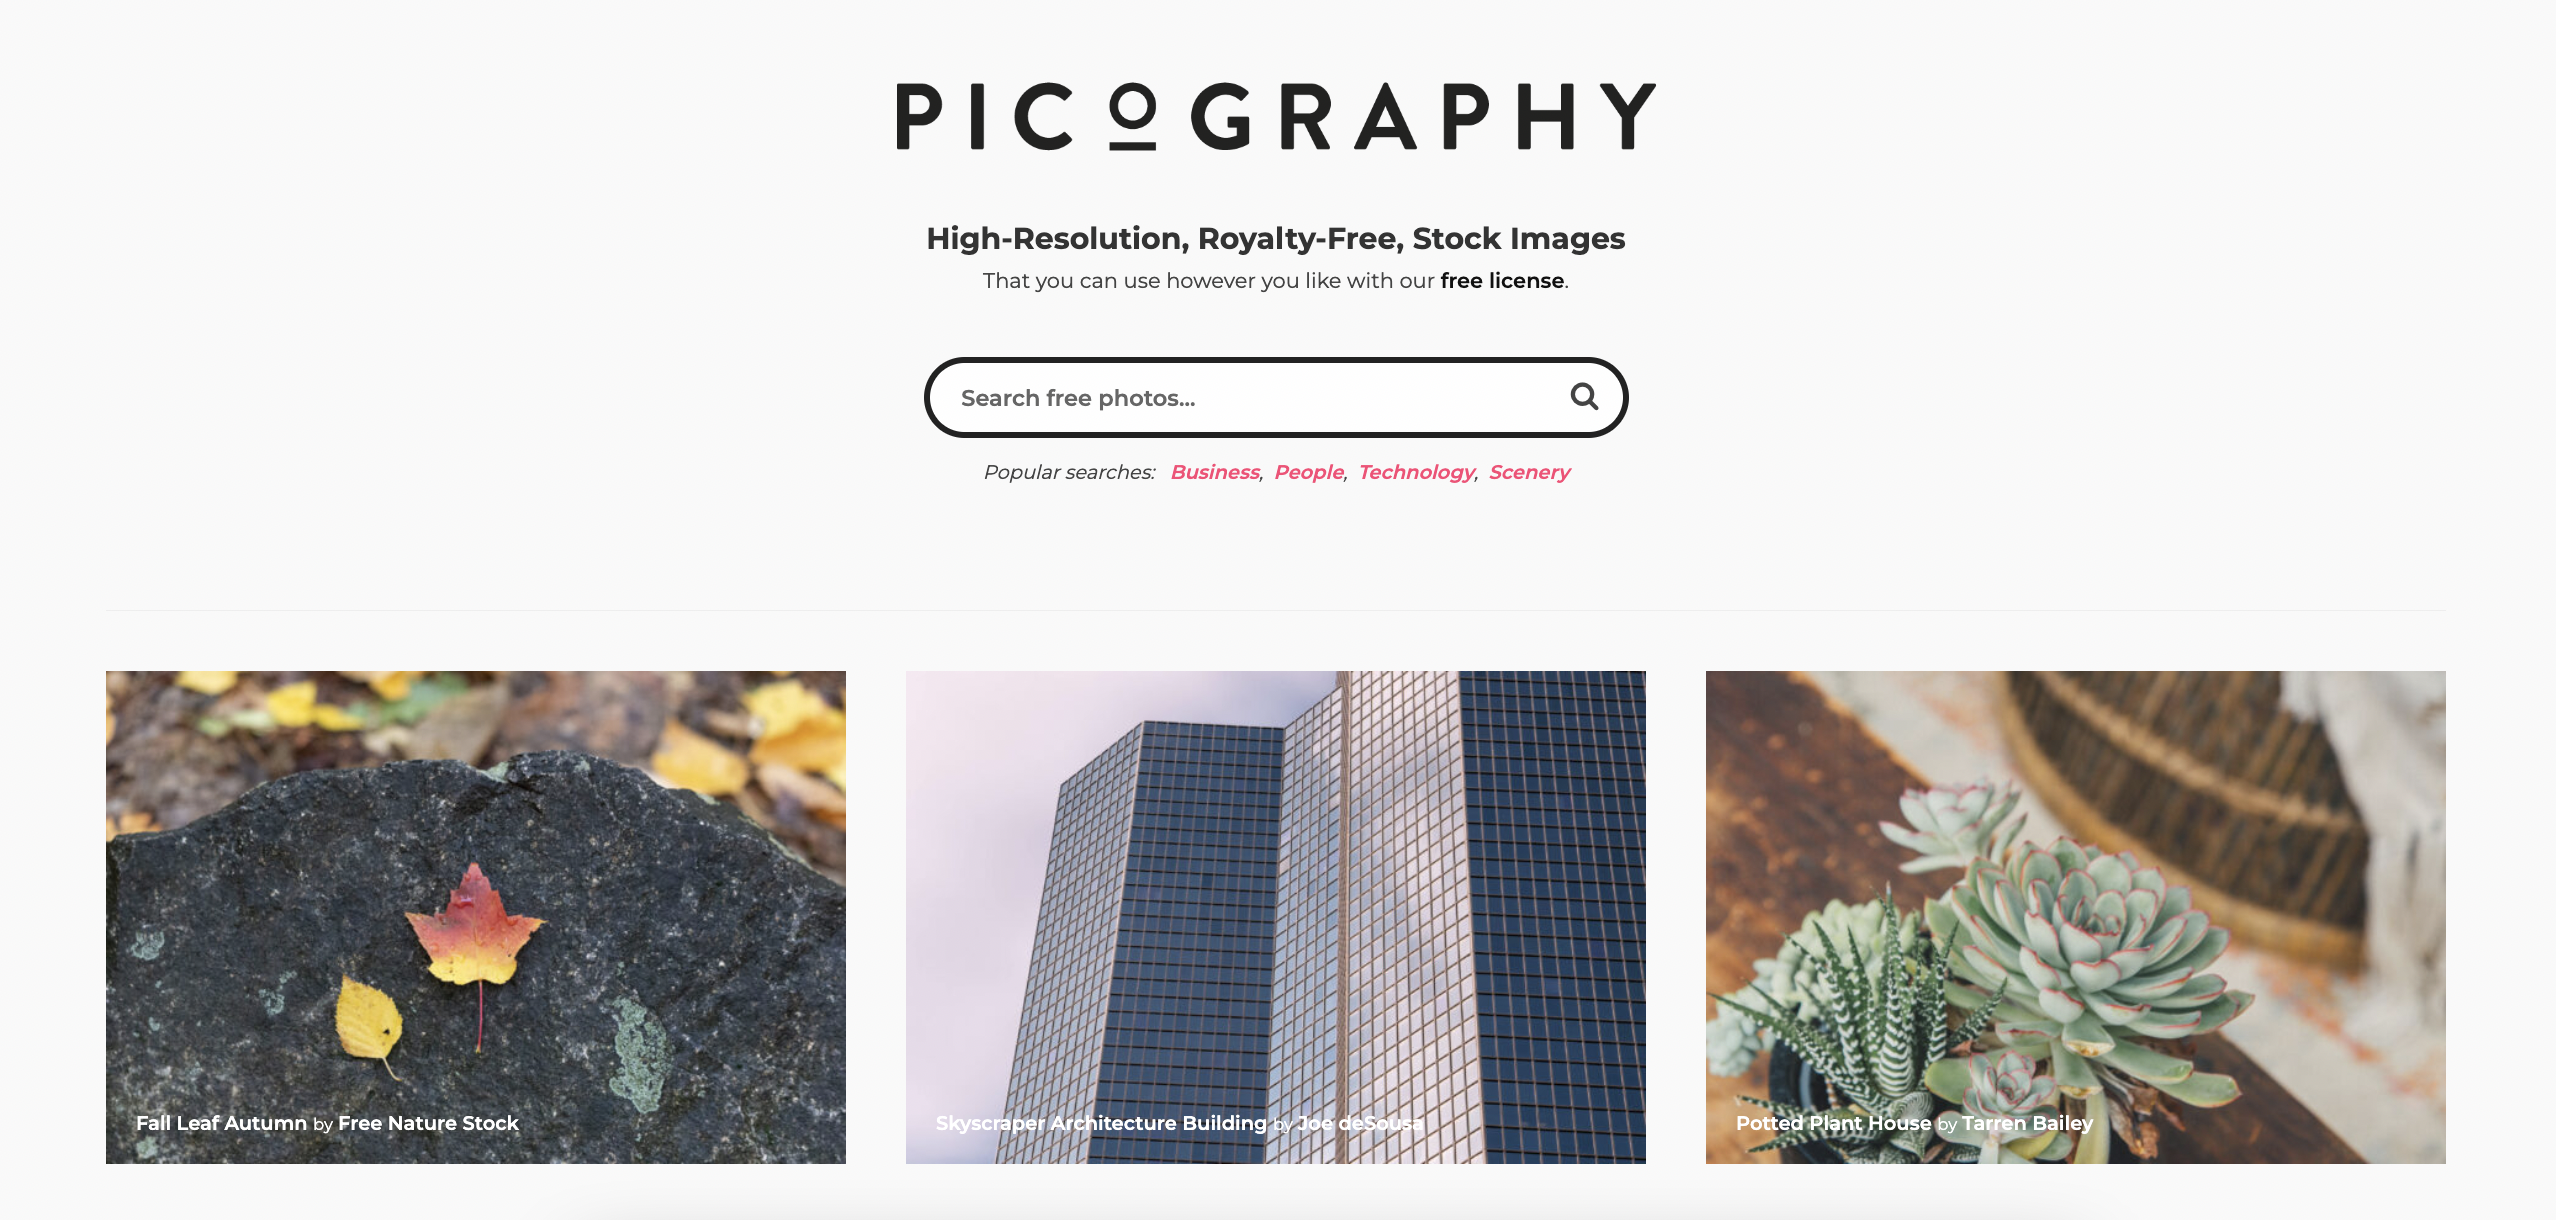 royalty-free stock images 